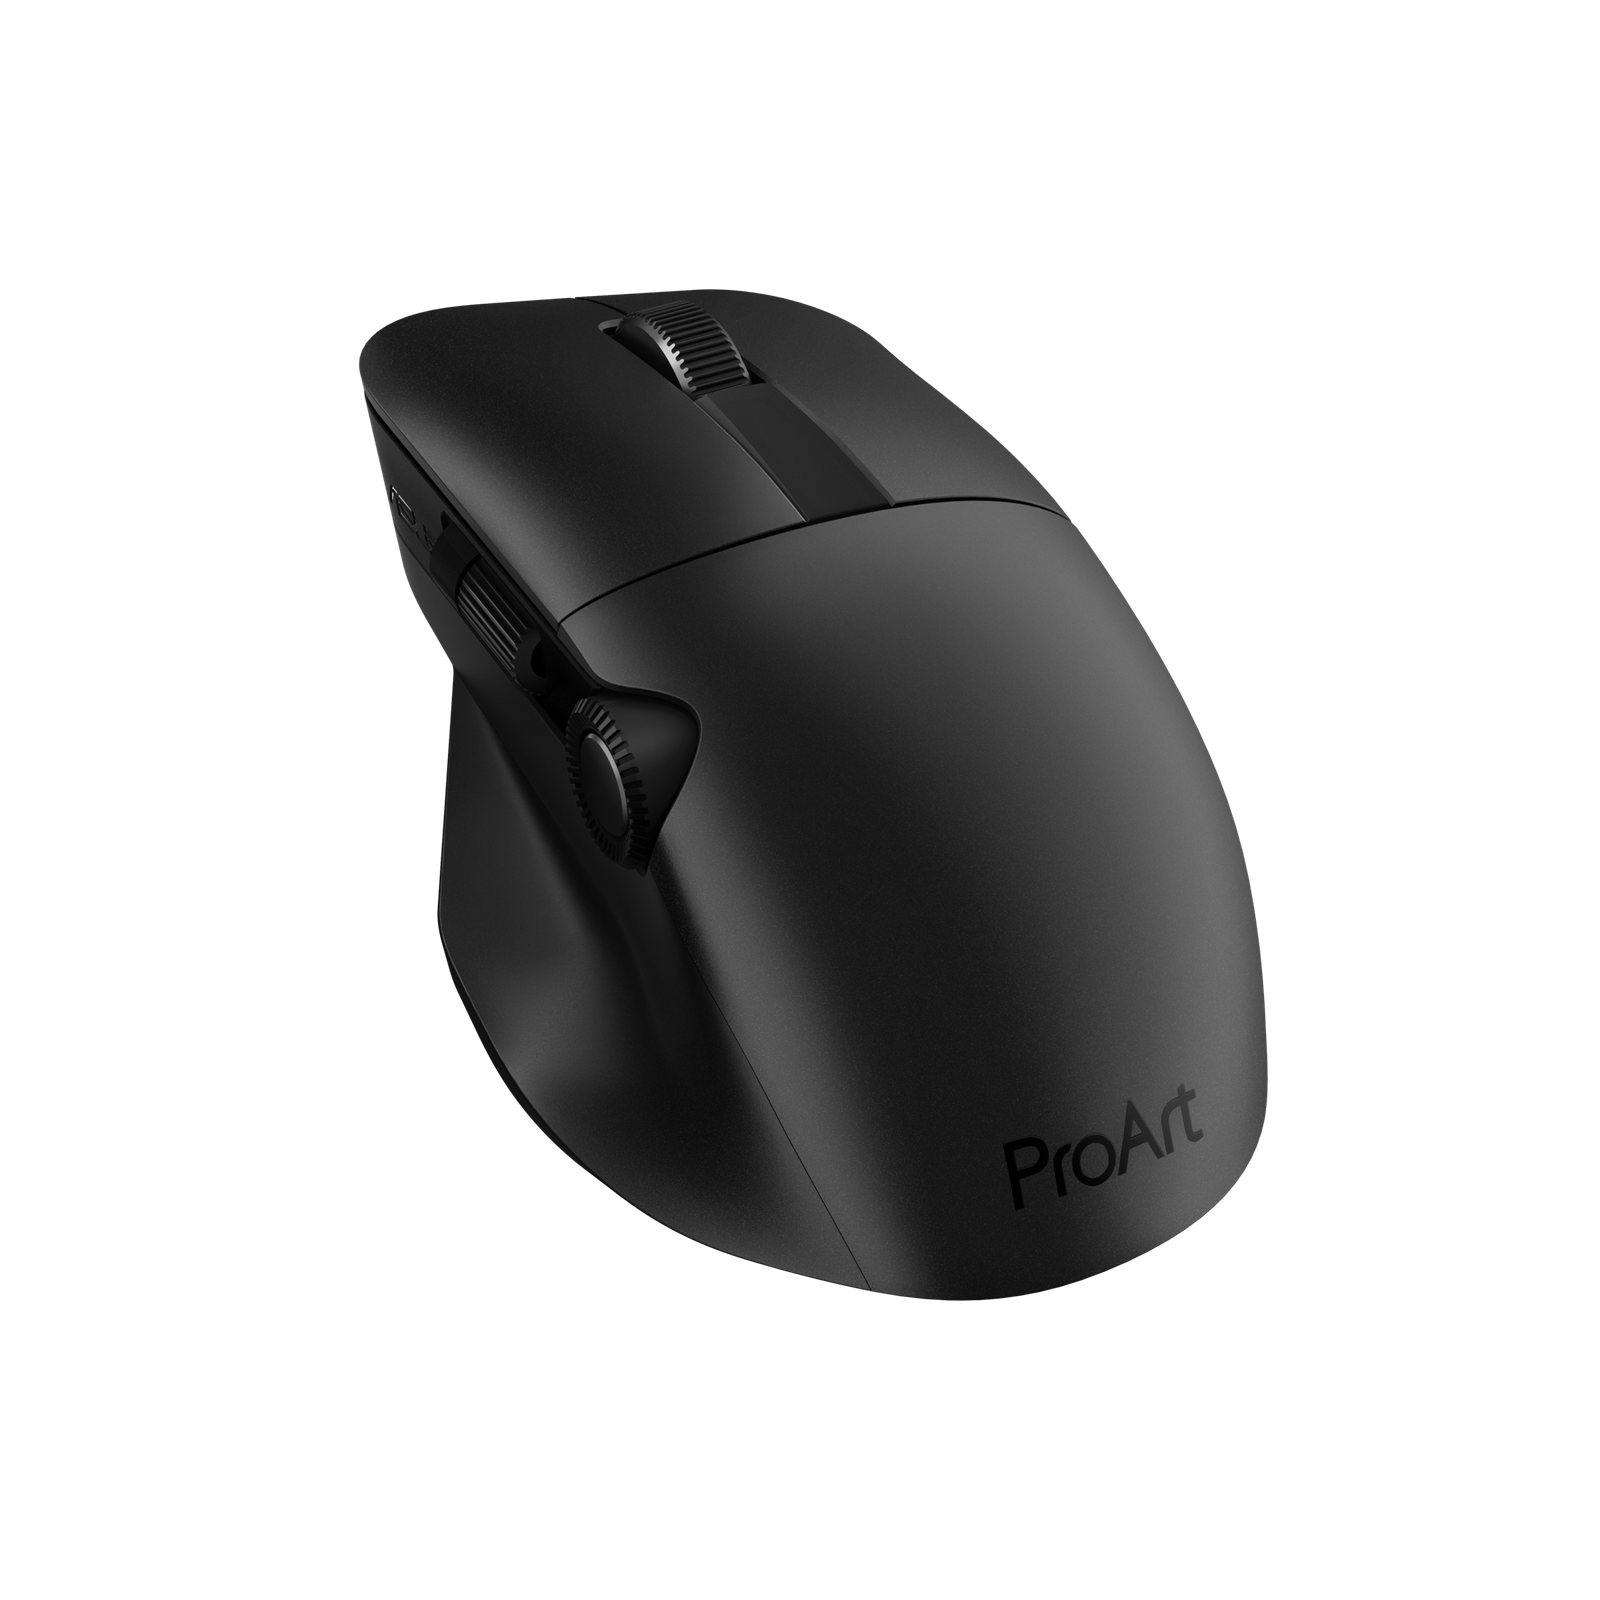 MD300 ASUS ProArt Mouse